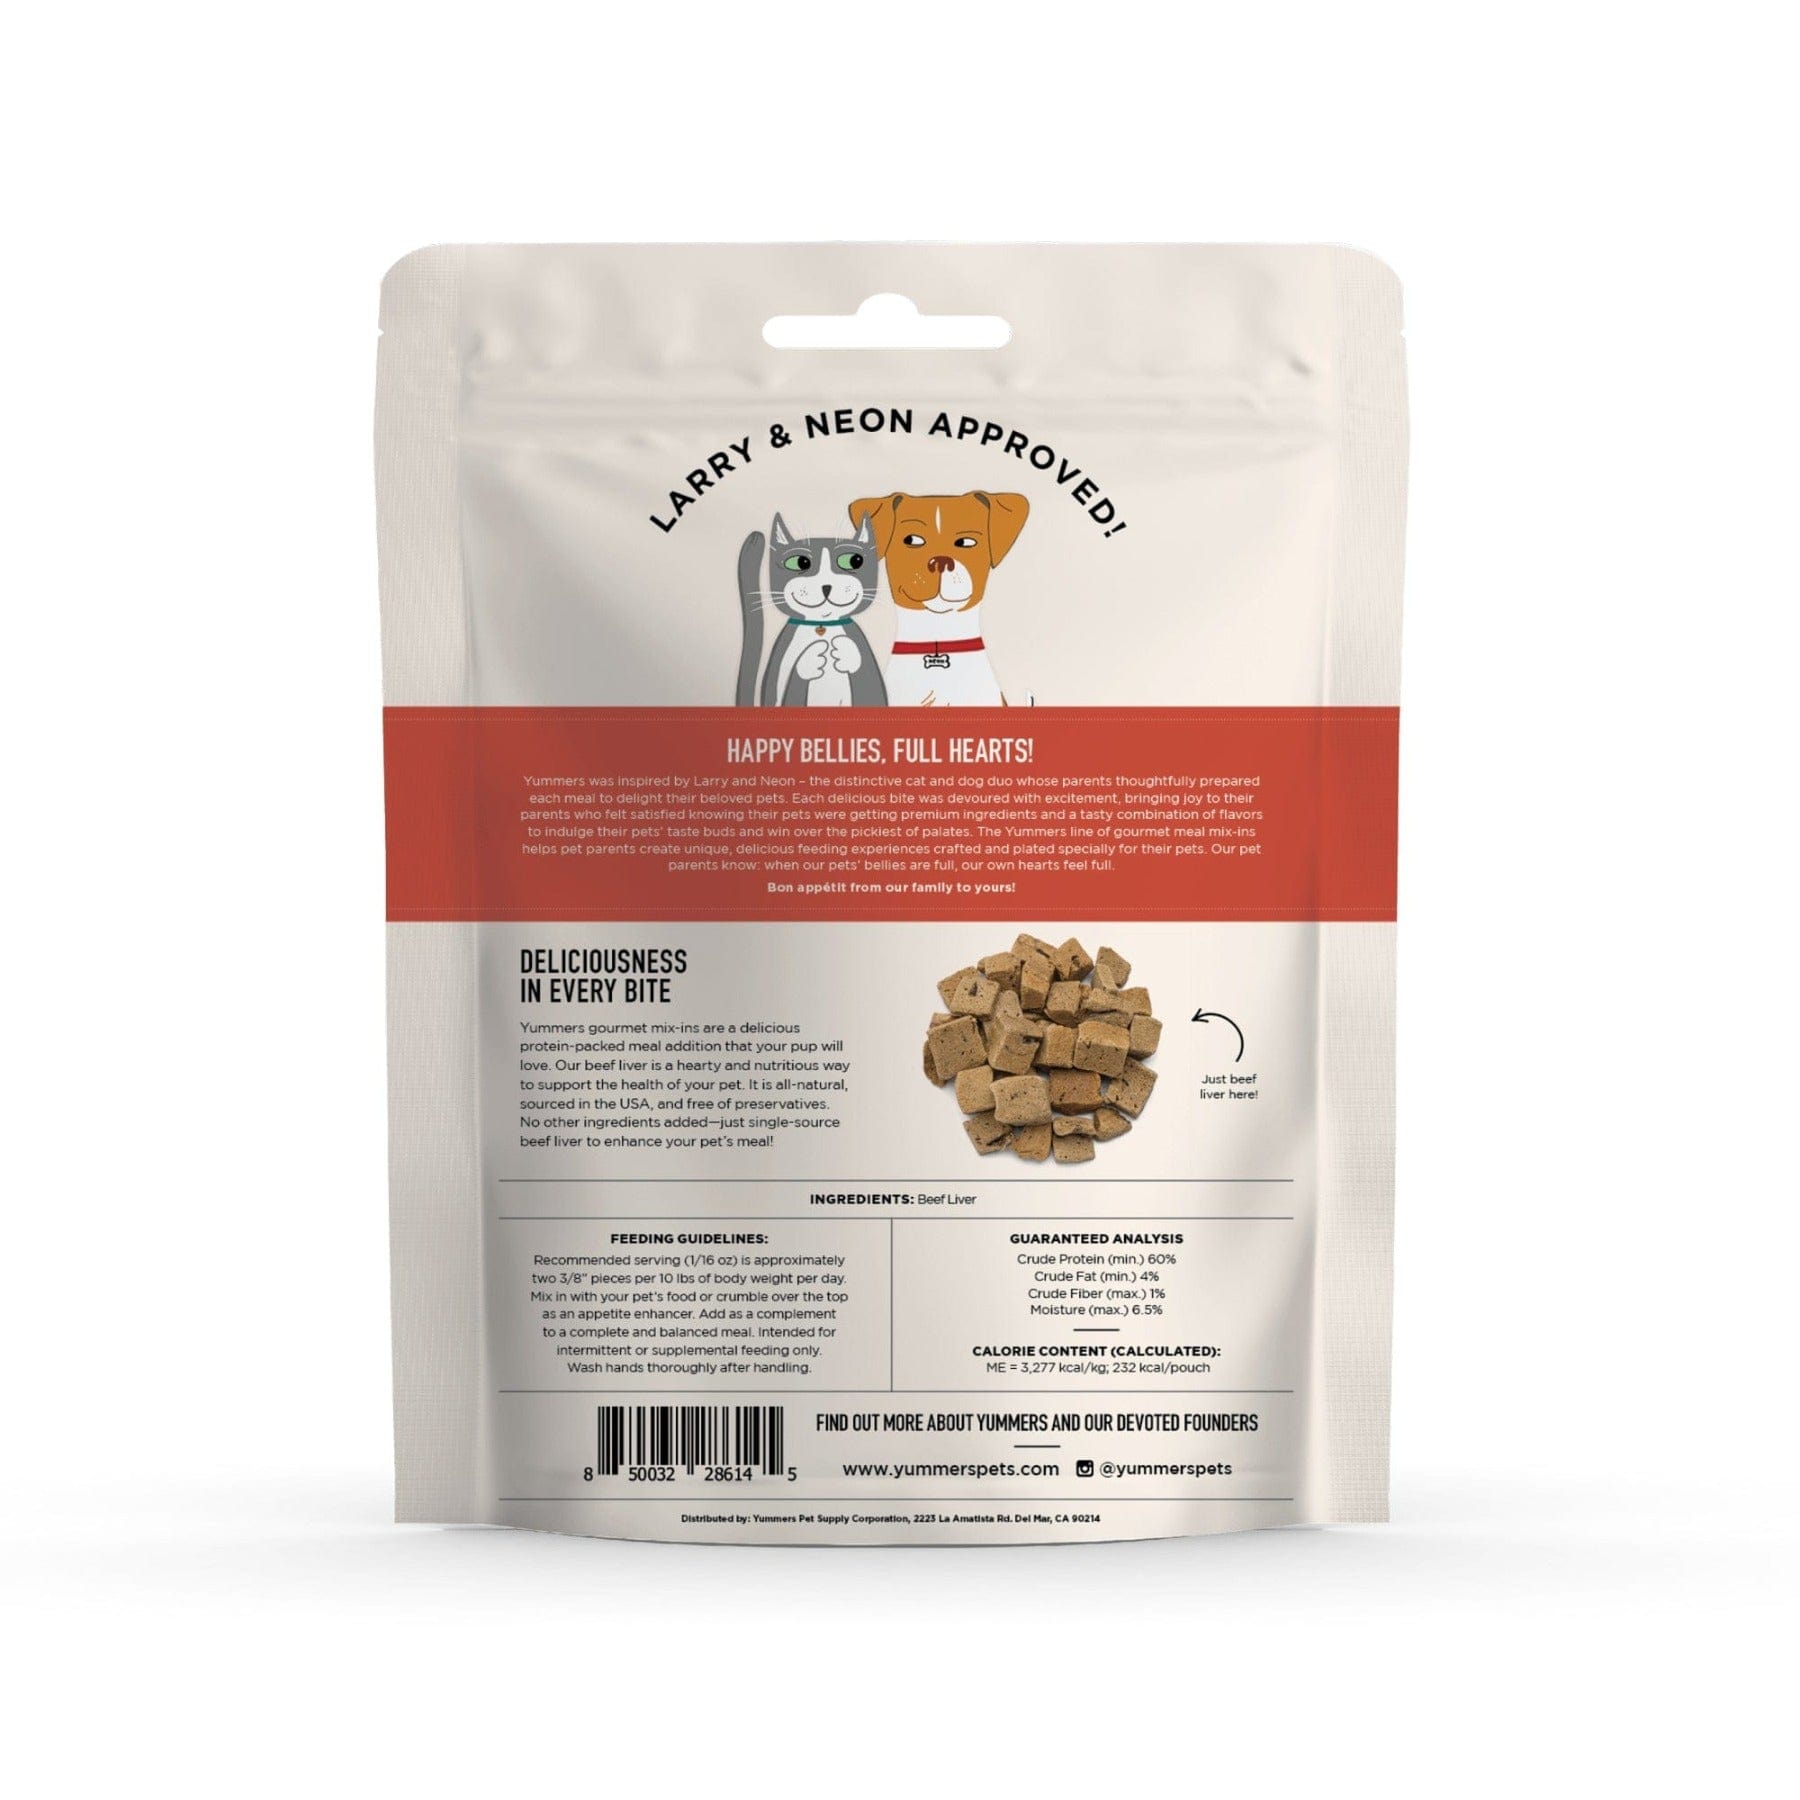 Yummers Freeze-dried Beef Liver for Dogs back of package